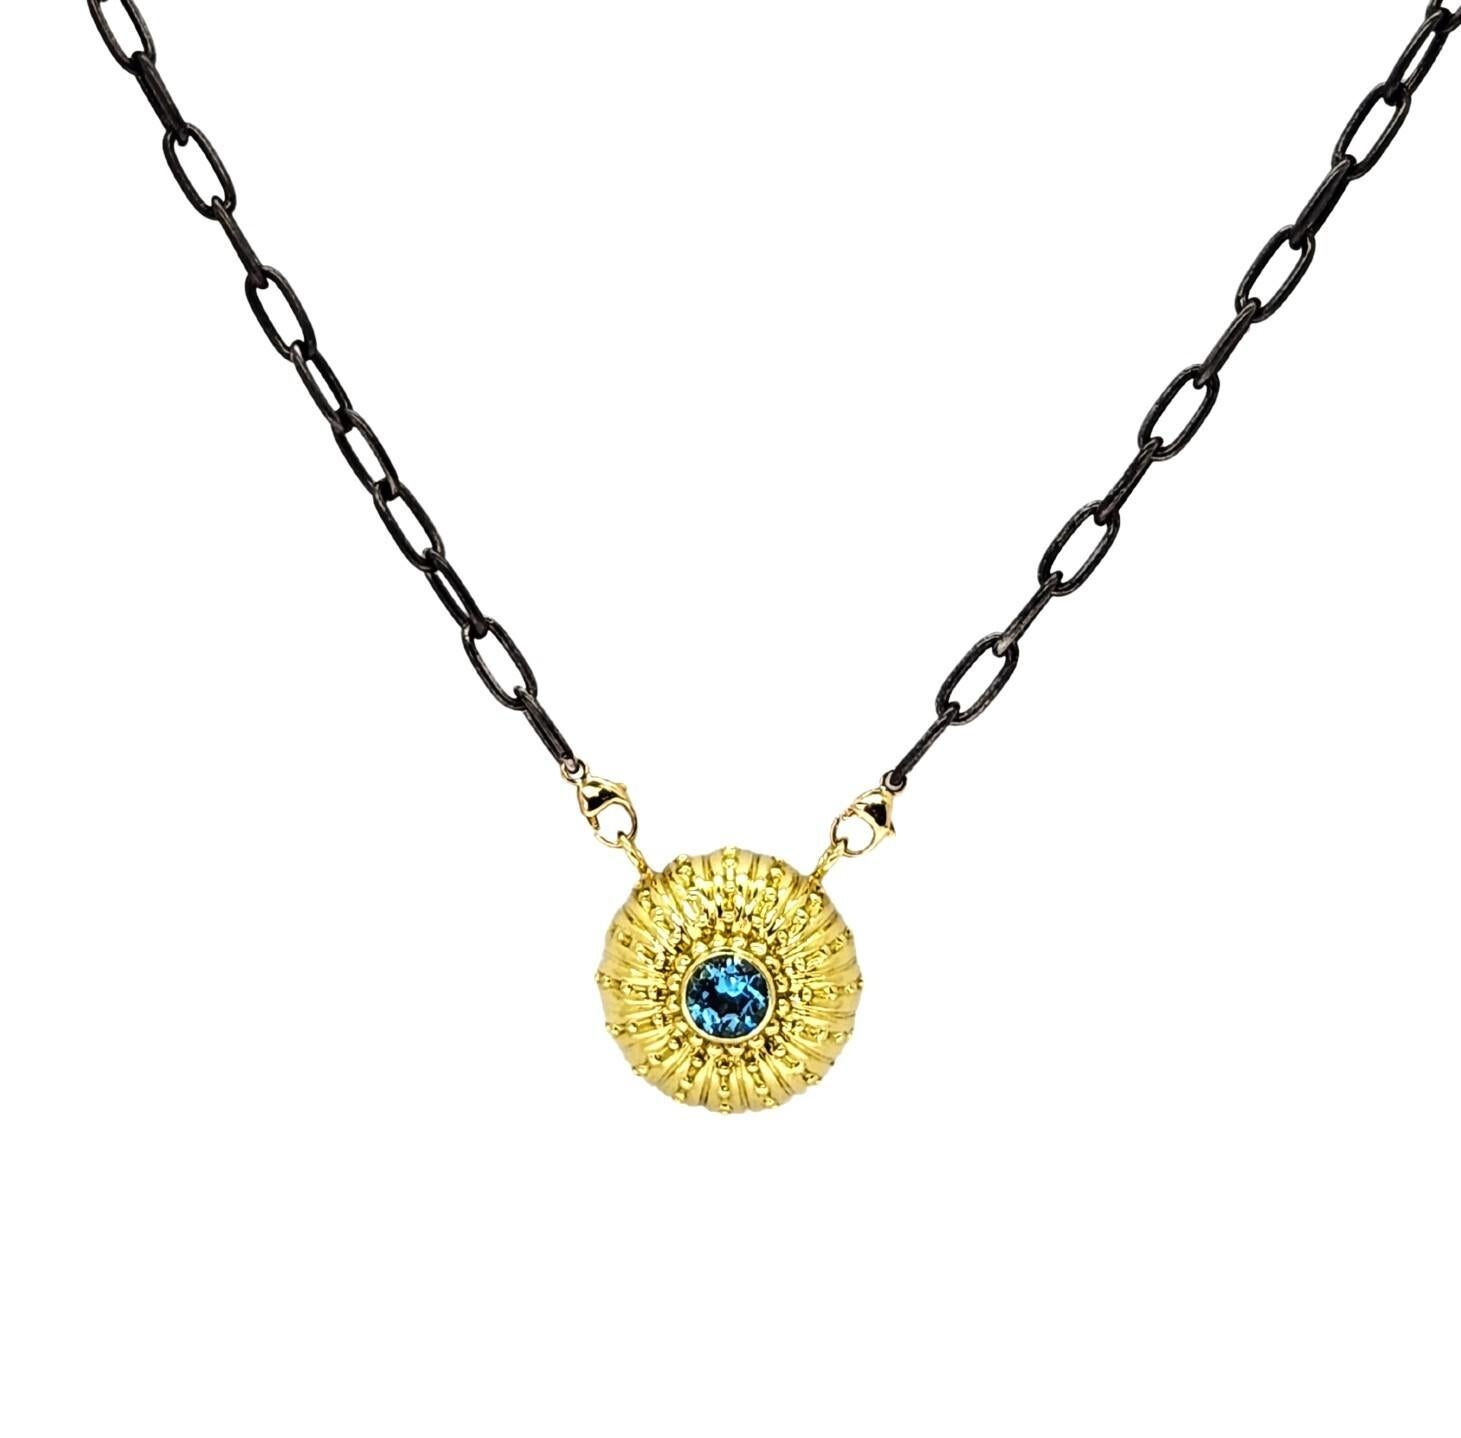 Contemporary Textured Sea Urchin Necklace with Ocean Blue Topaz Center and 18K Gold Necklace For Sale